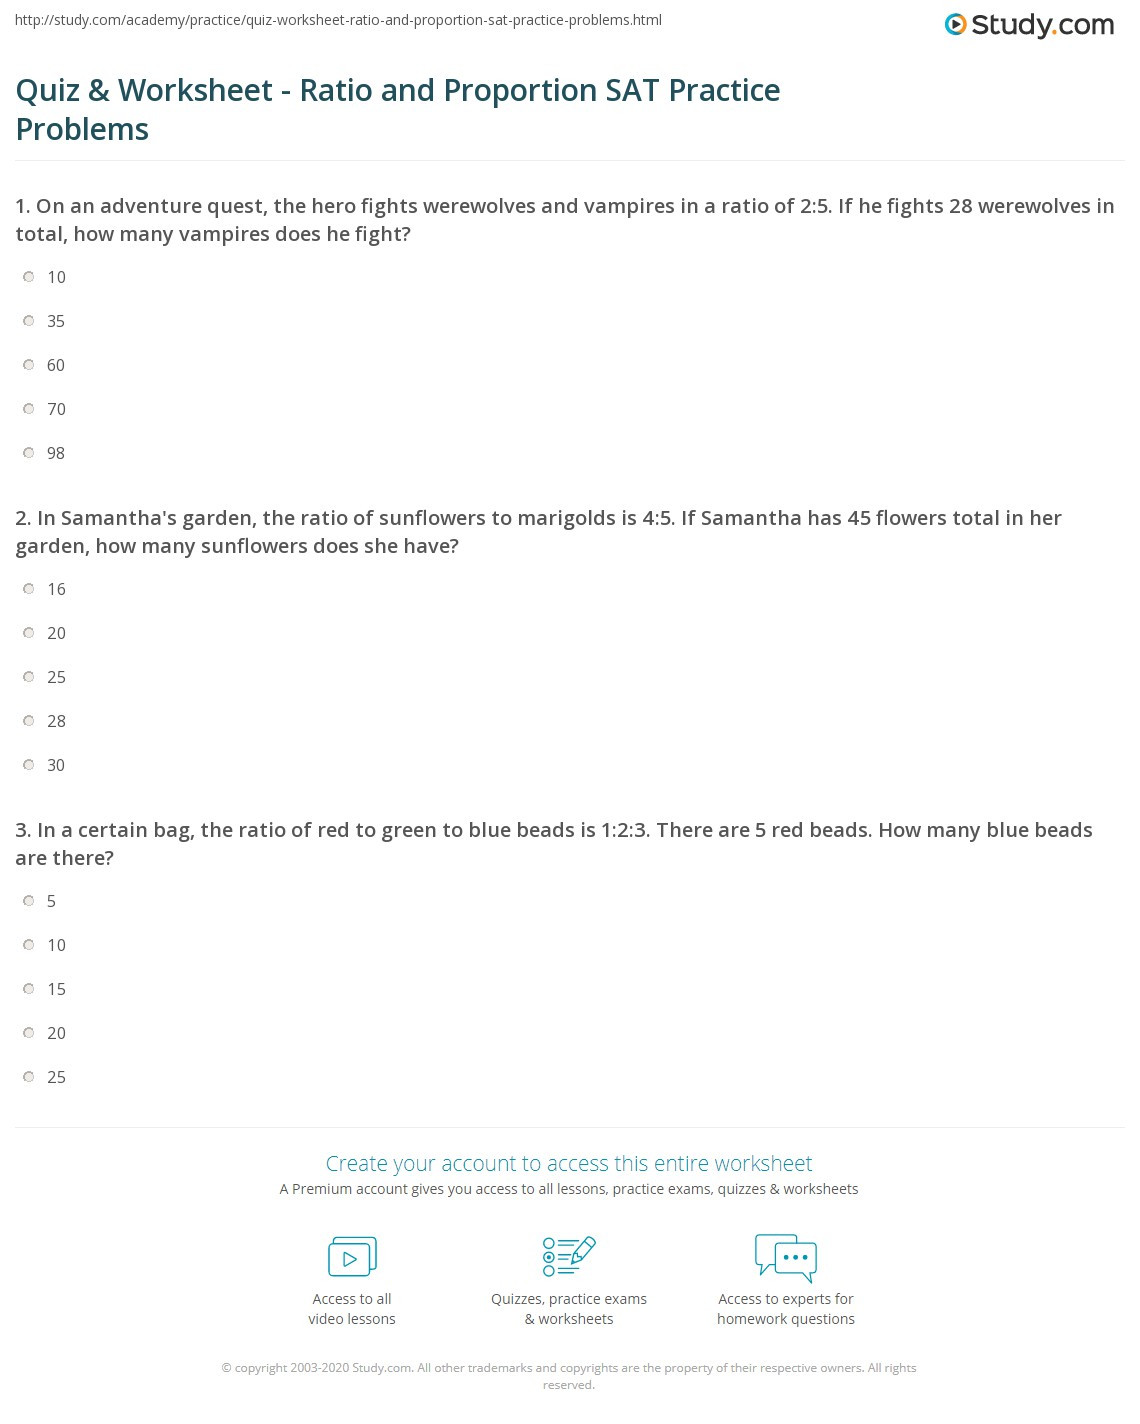 Ratios and Rates Worksheet Quiz &amp; Worksheet Ratio and Proportion Sat Practice